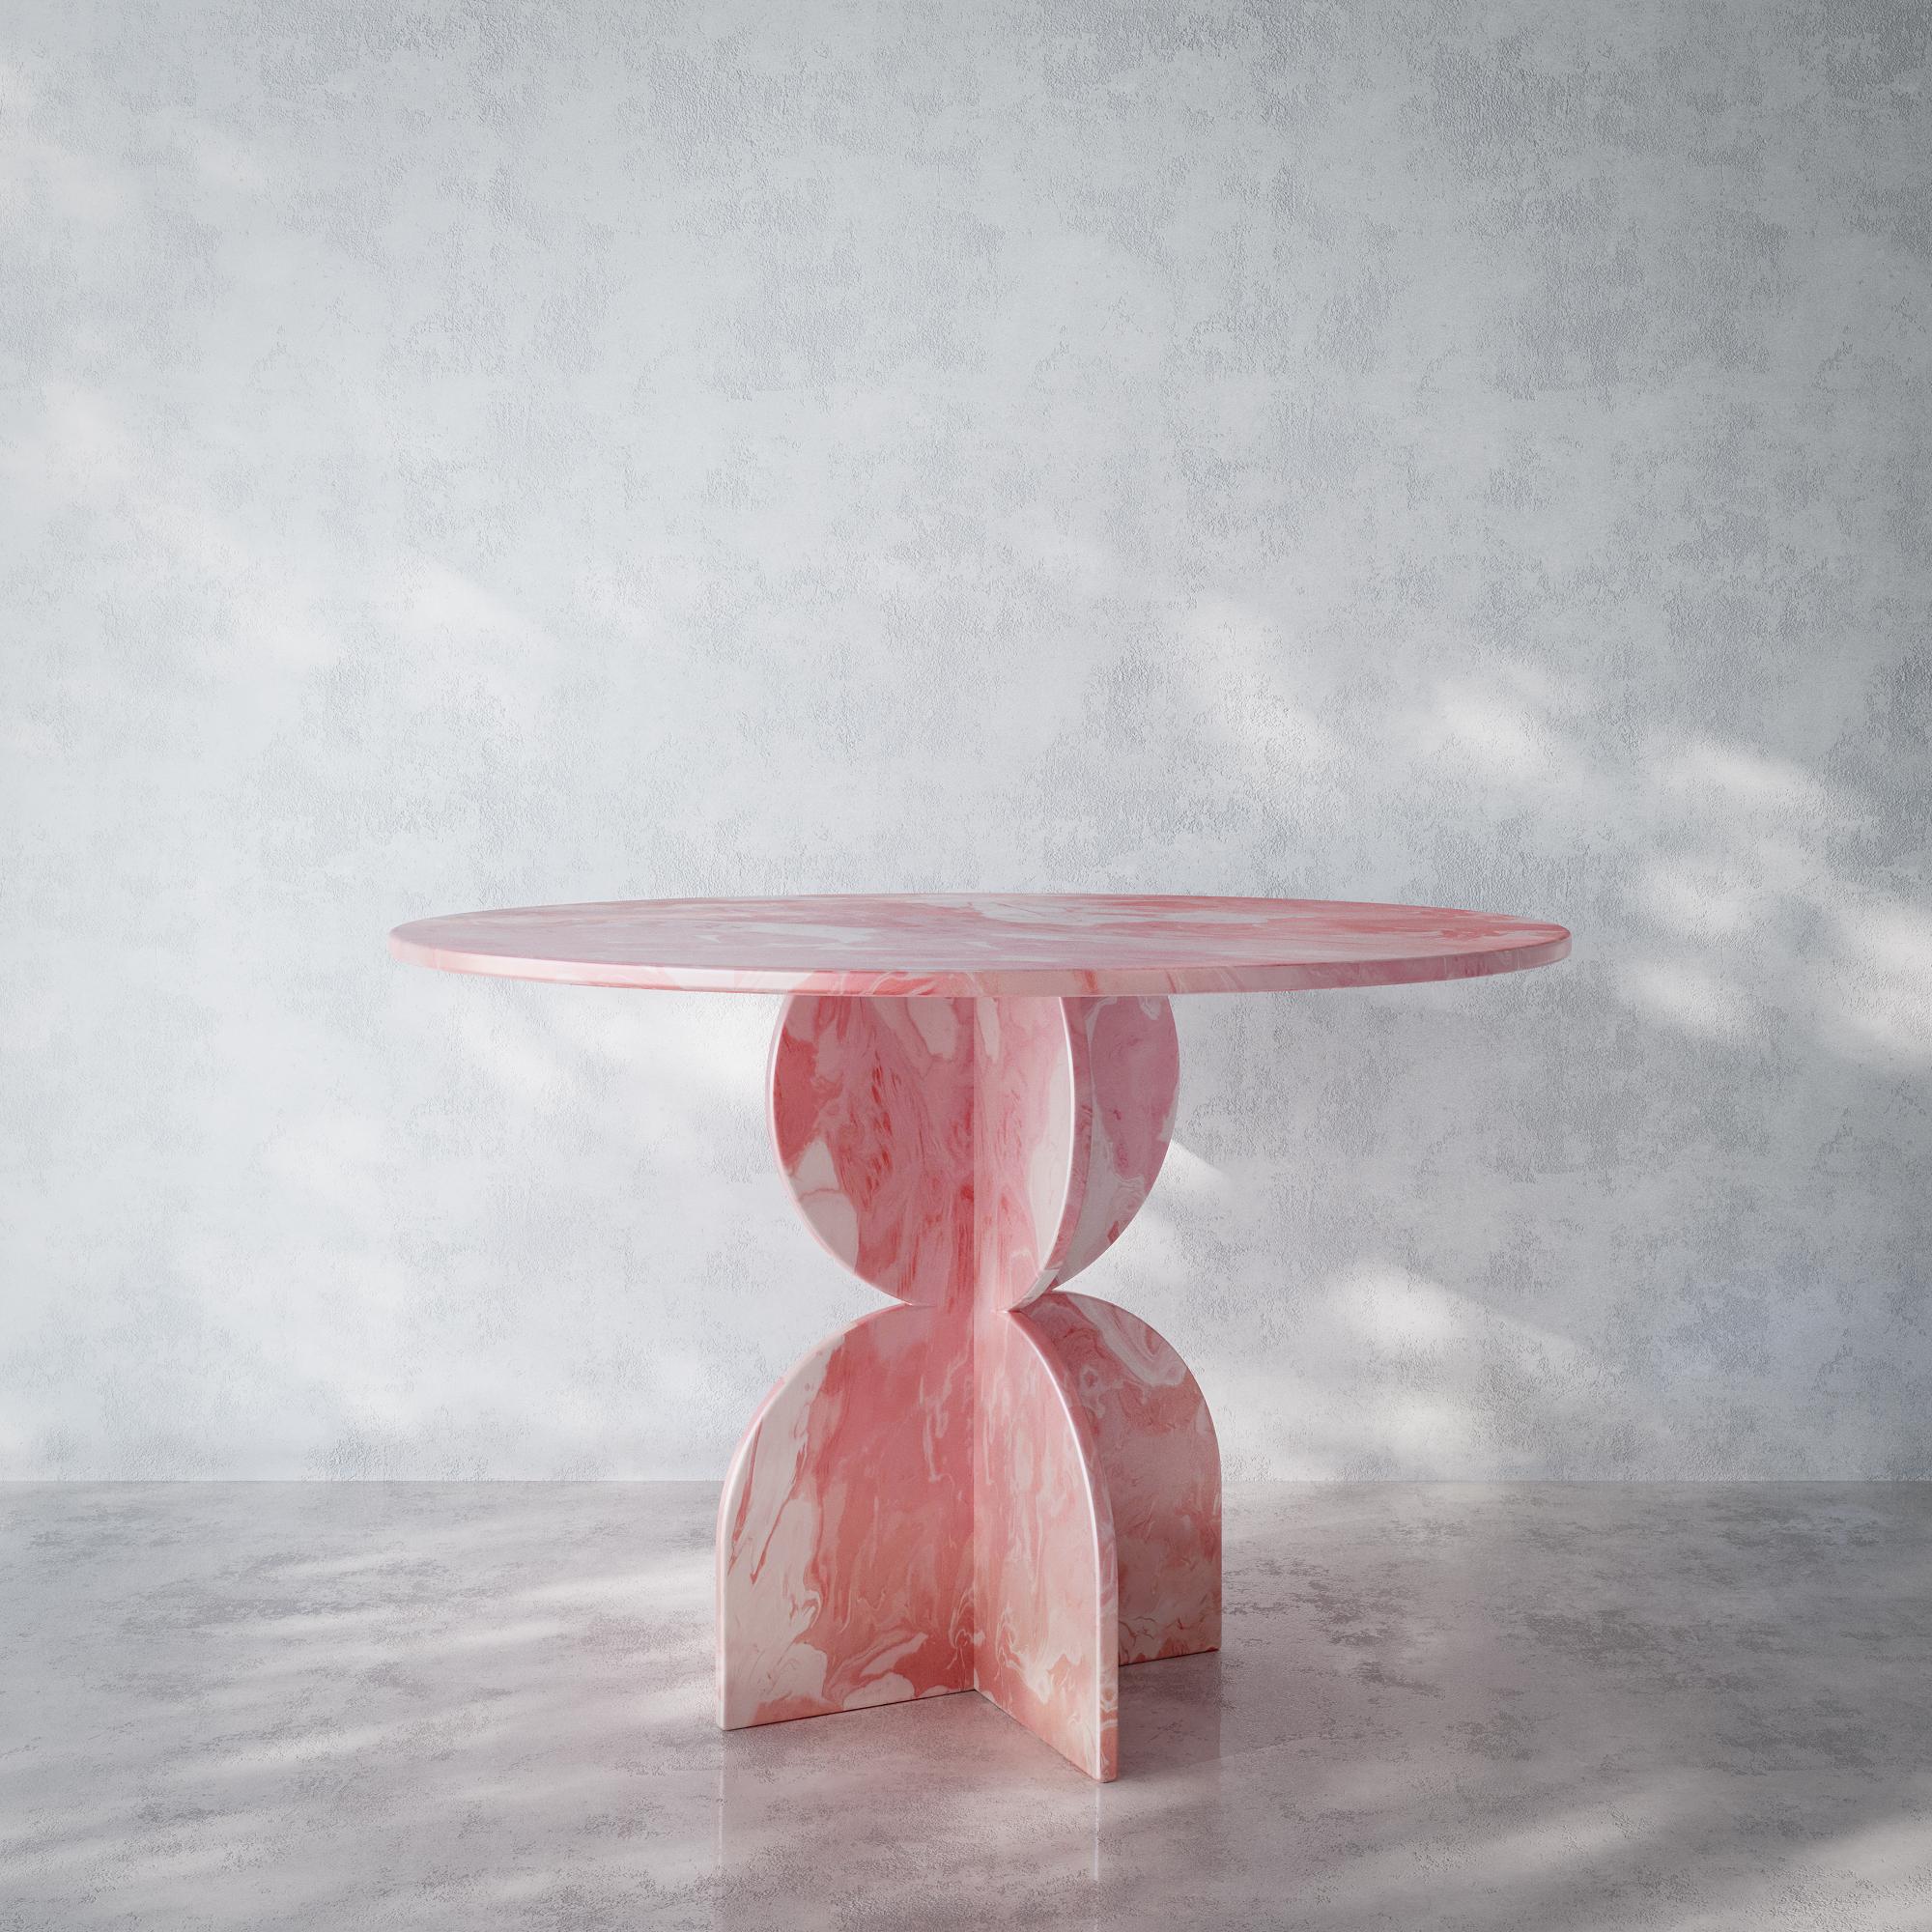 Contemporary Pink Round Table Hand-Crafted 100% Recycled Plastic by Anqa Studios.
Incredible conversations happen around incredible tables. ANQA Studios round table is a geometrically shaped table with a design inspired by the brutalist architecture